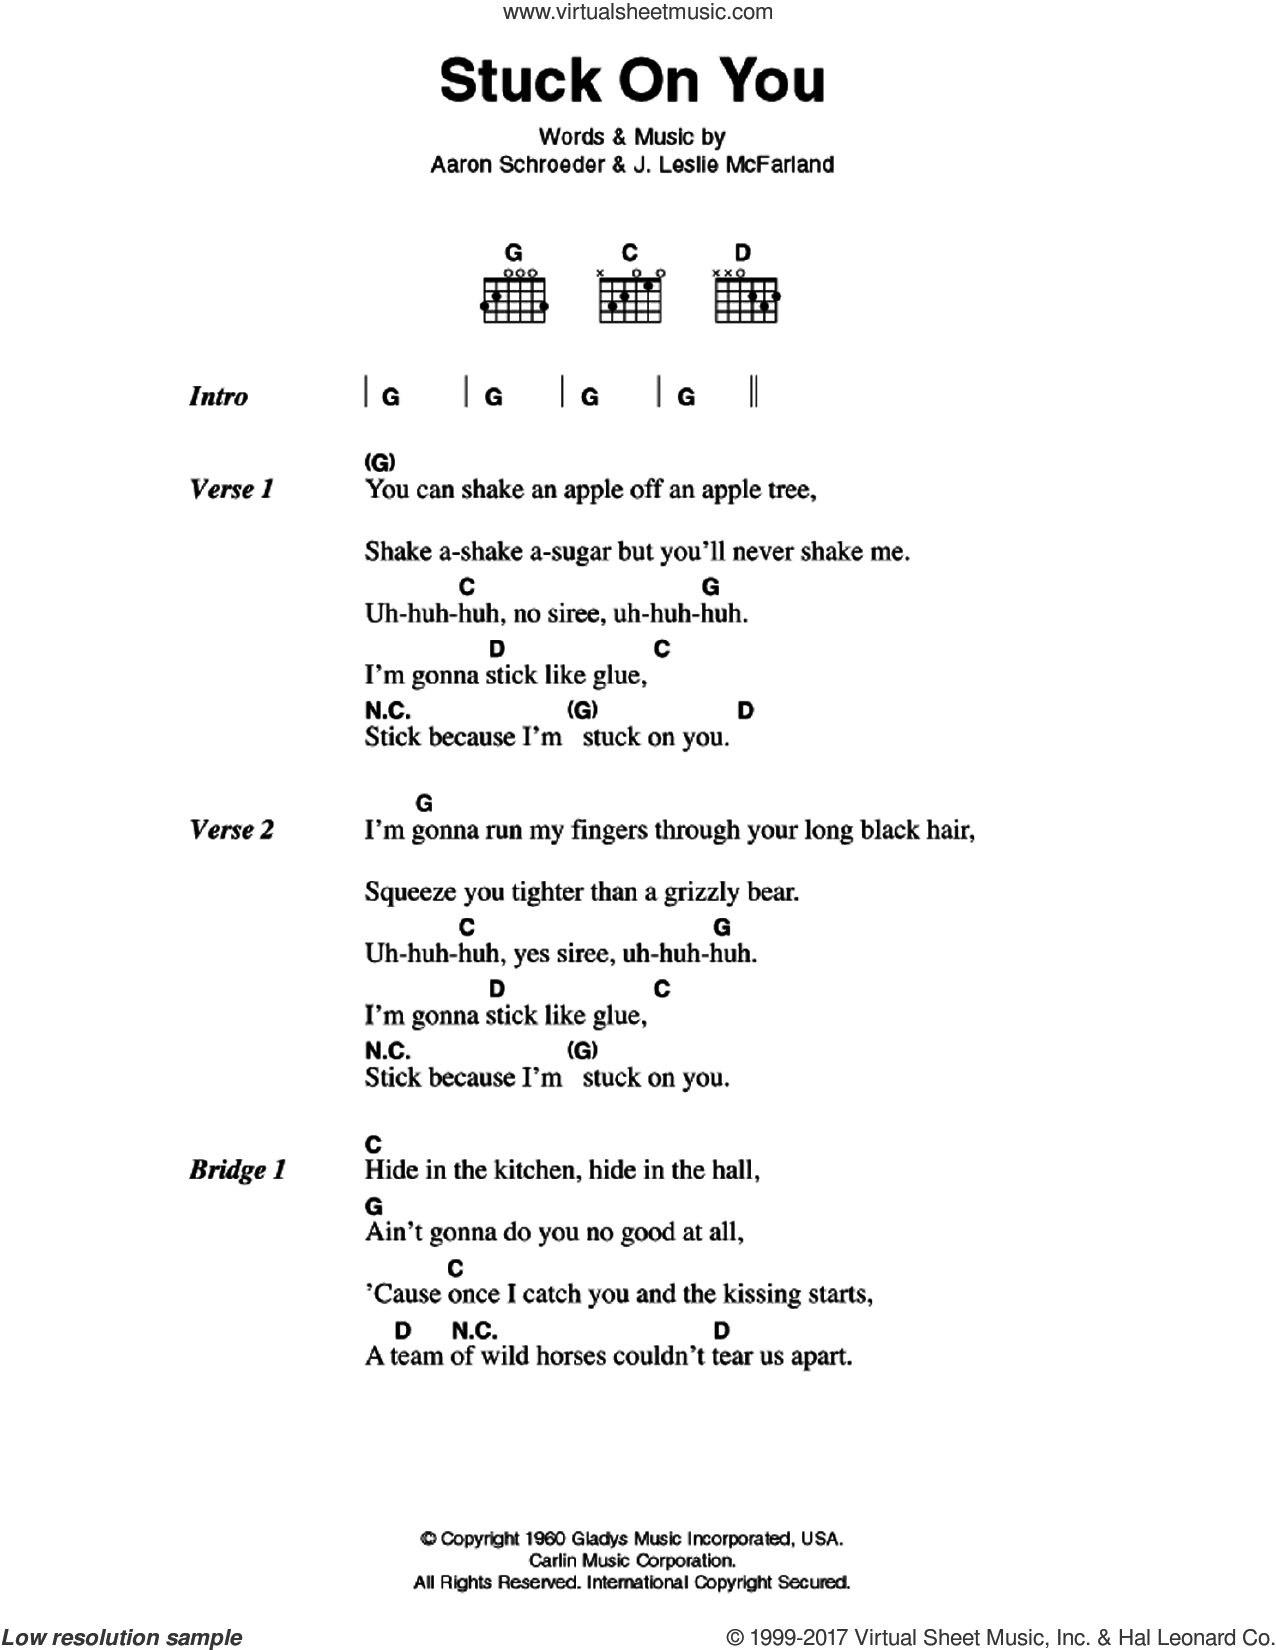 Stuck On You 1, by Elvis Presley - lyrics and chords